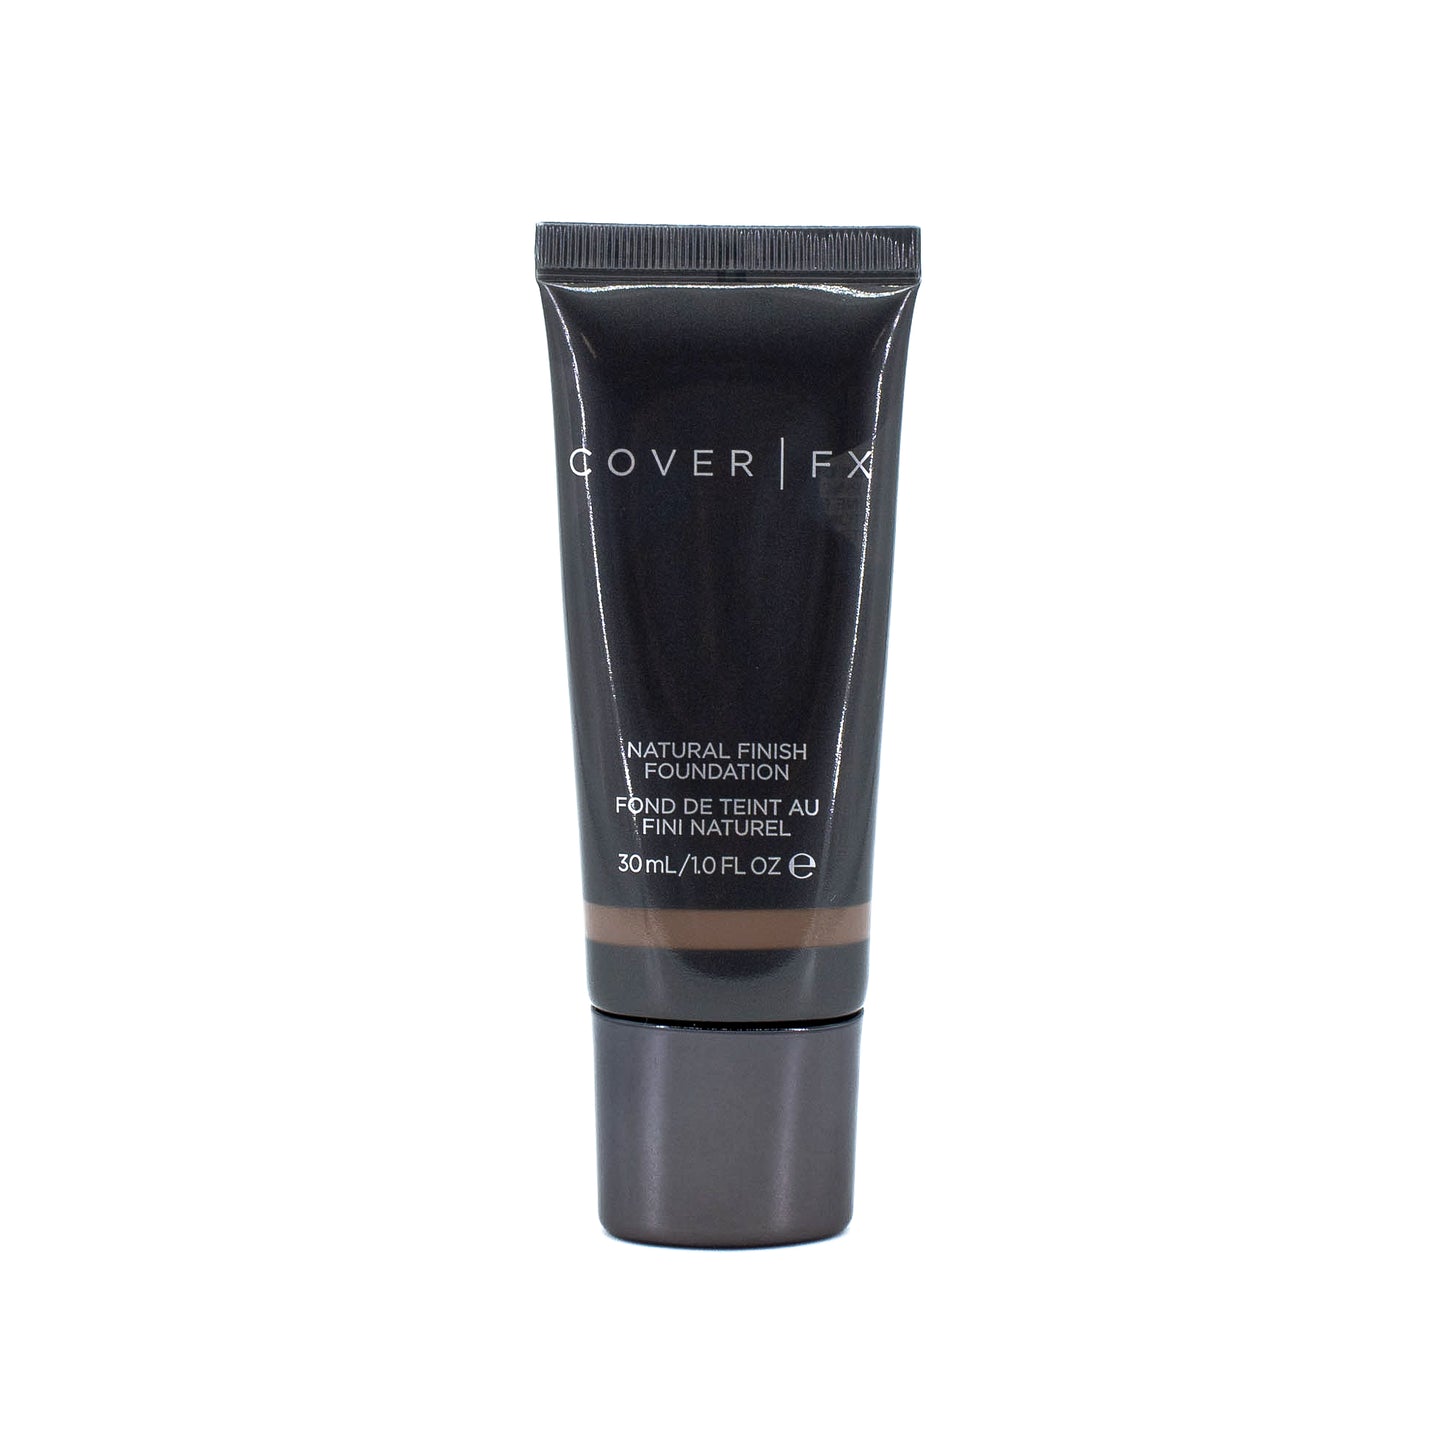 COVER FX Natural Finish Foundation G110 1oz - Imperfect Box